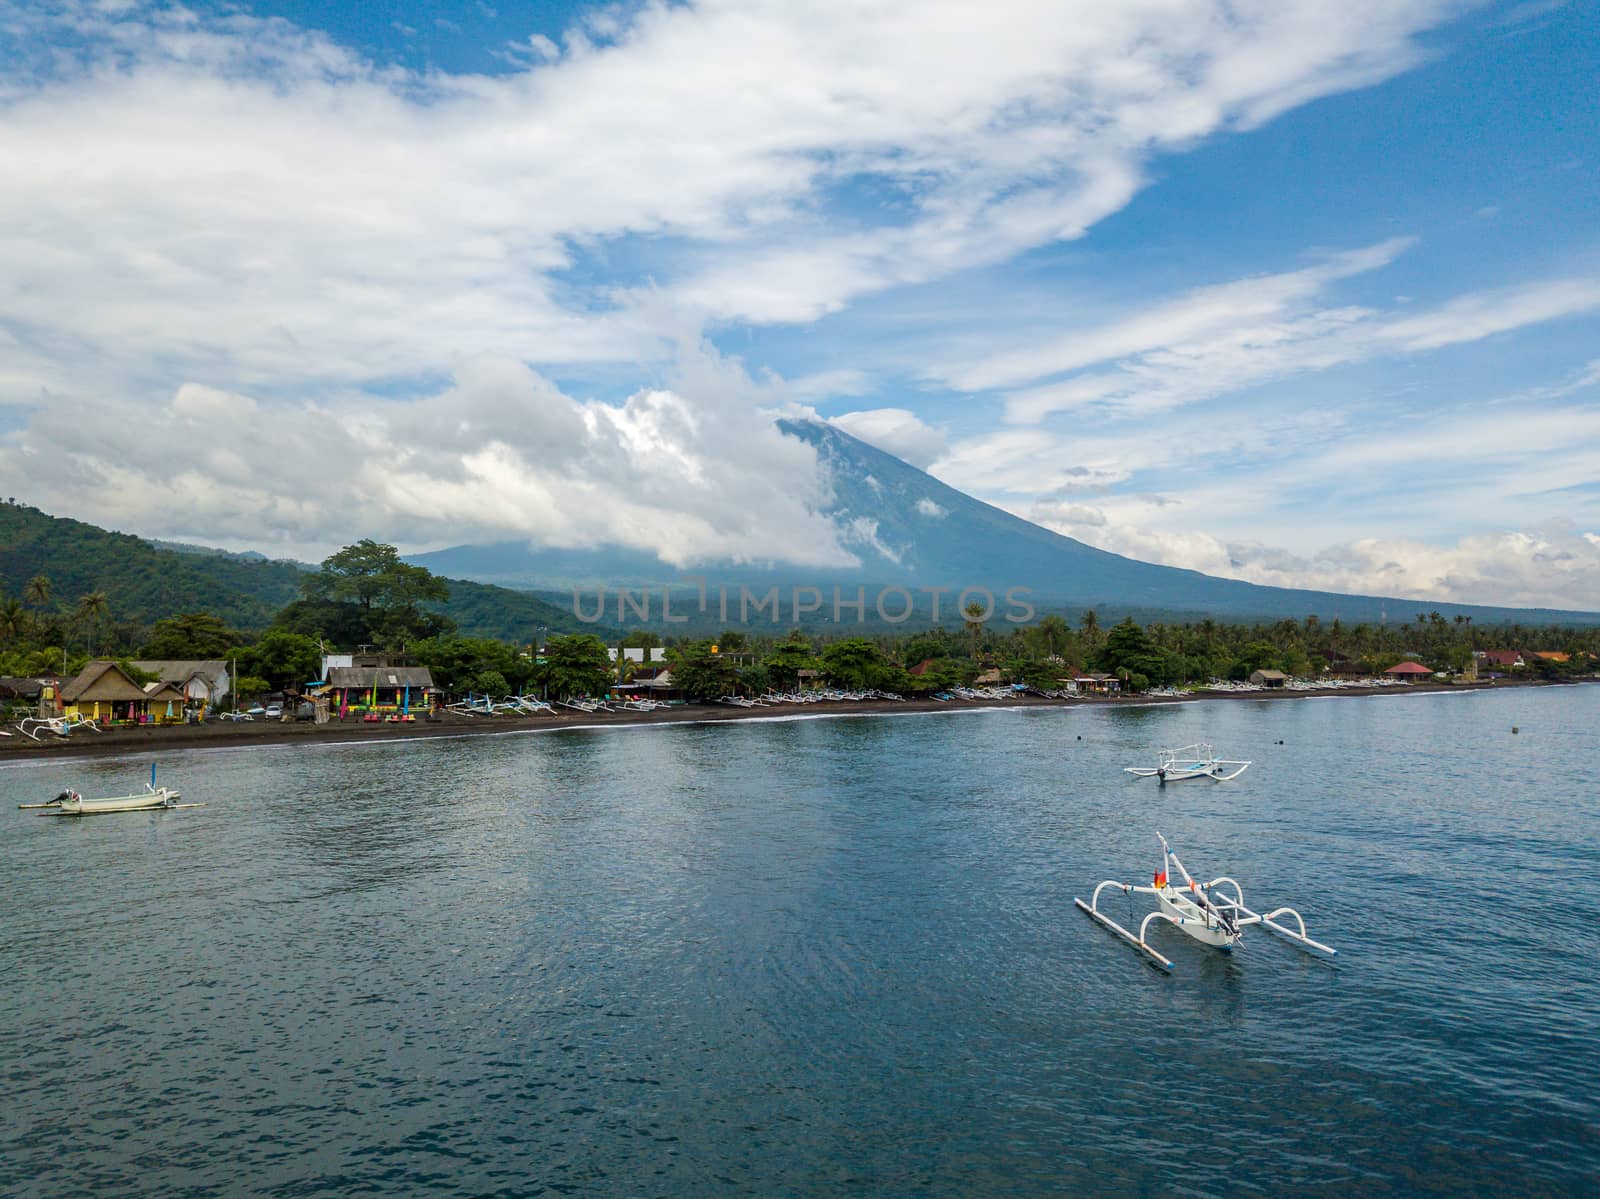 Aerial view of Amed Beach and Mount Agung volcano in Bali by dutourdumonde